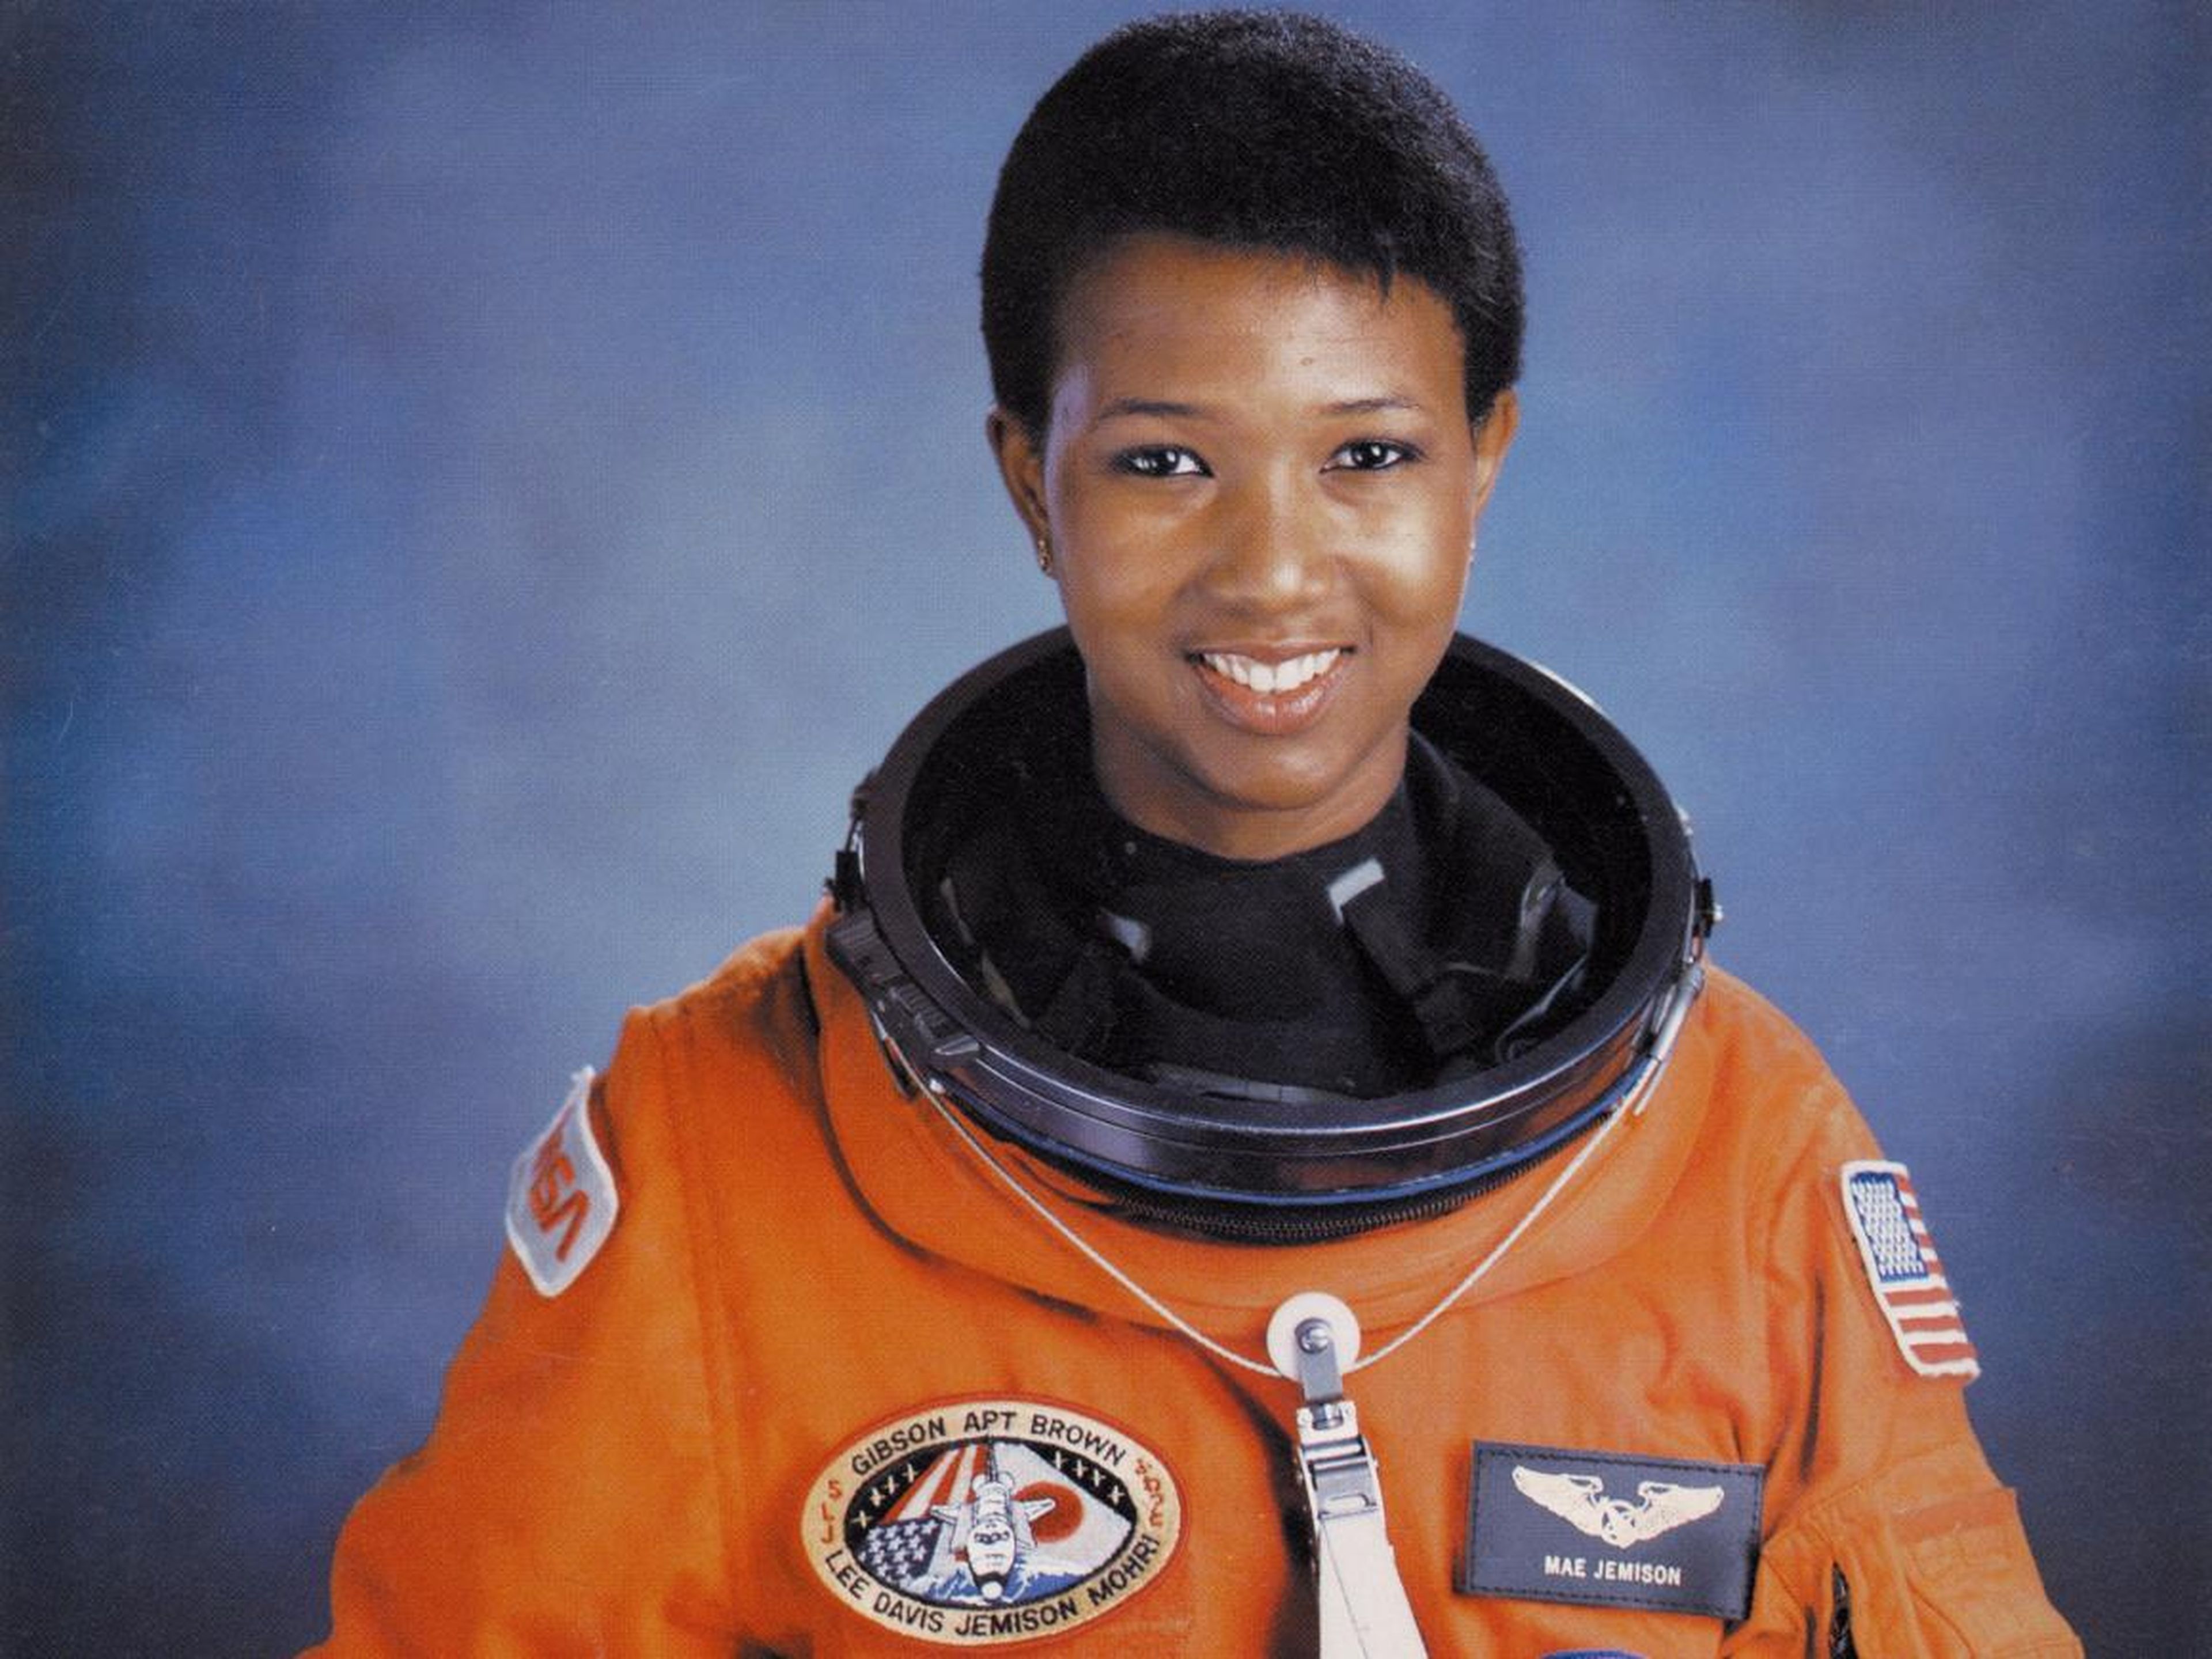 Mae Carol Jemison went to space 29 years later in 1992, becoming the first African-American woman in space.